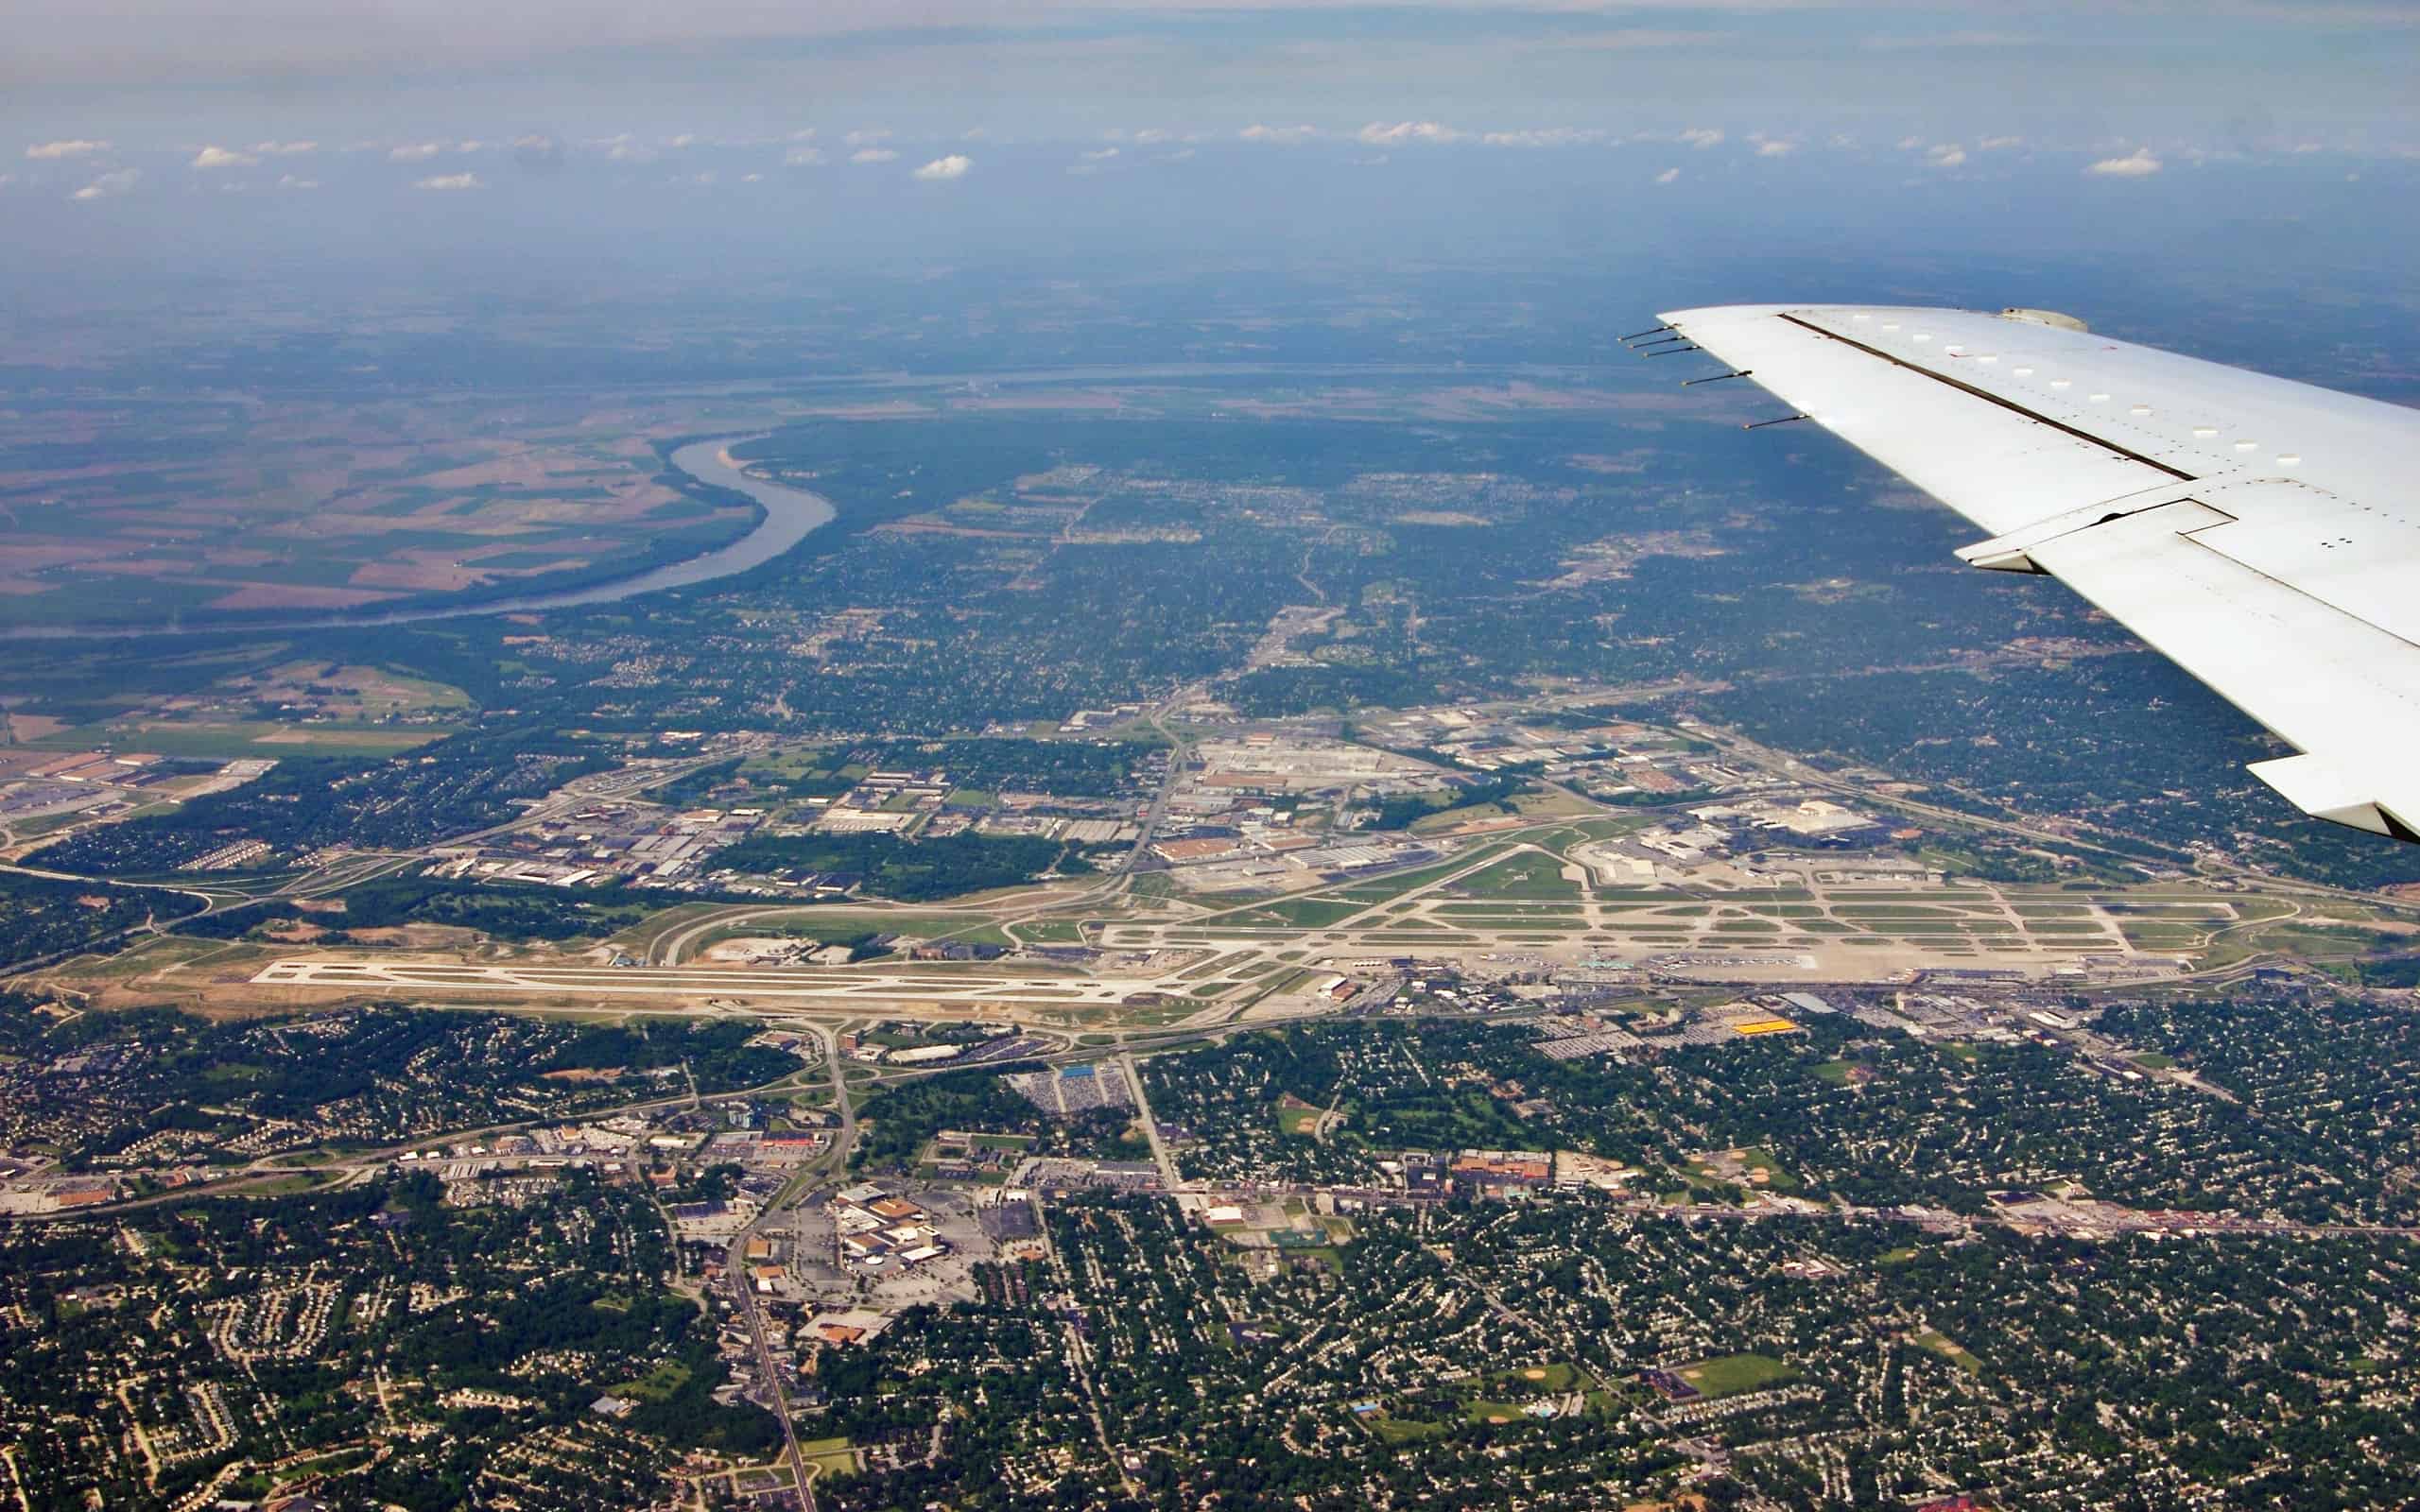 St. Louis Airport from the Air